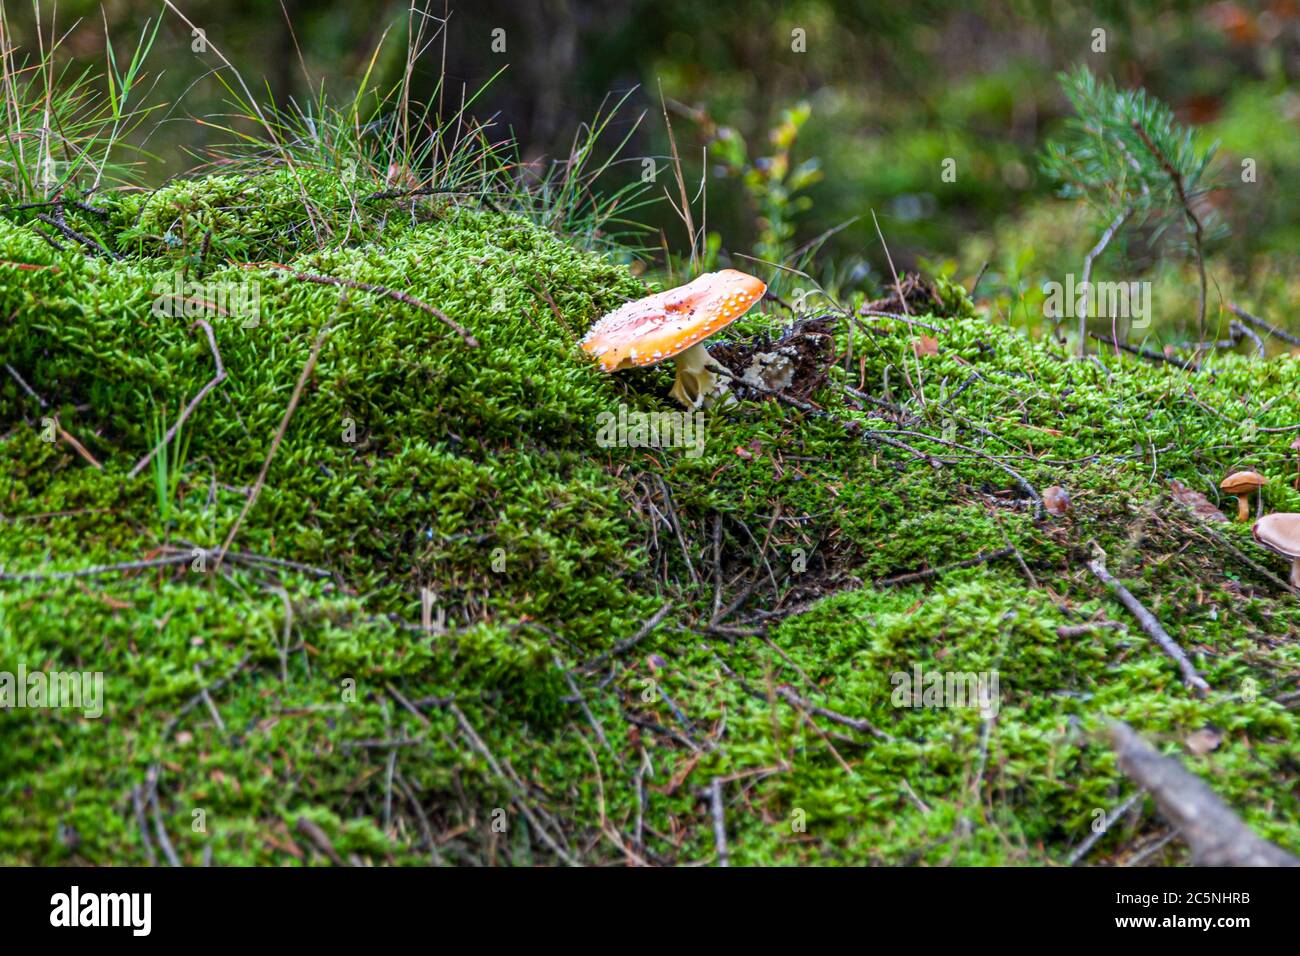 From the Upper Palatinate Fairytale Forest. Mushrooms in the Waldnaab Valley, Bavaria, Germany Stock Photo